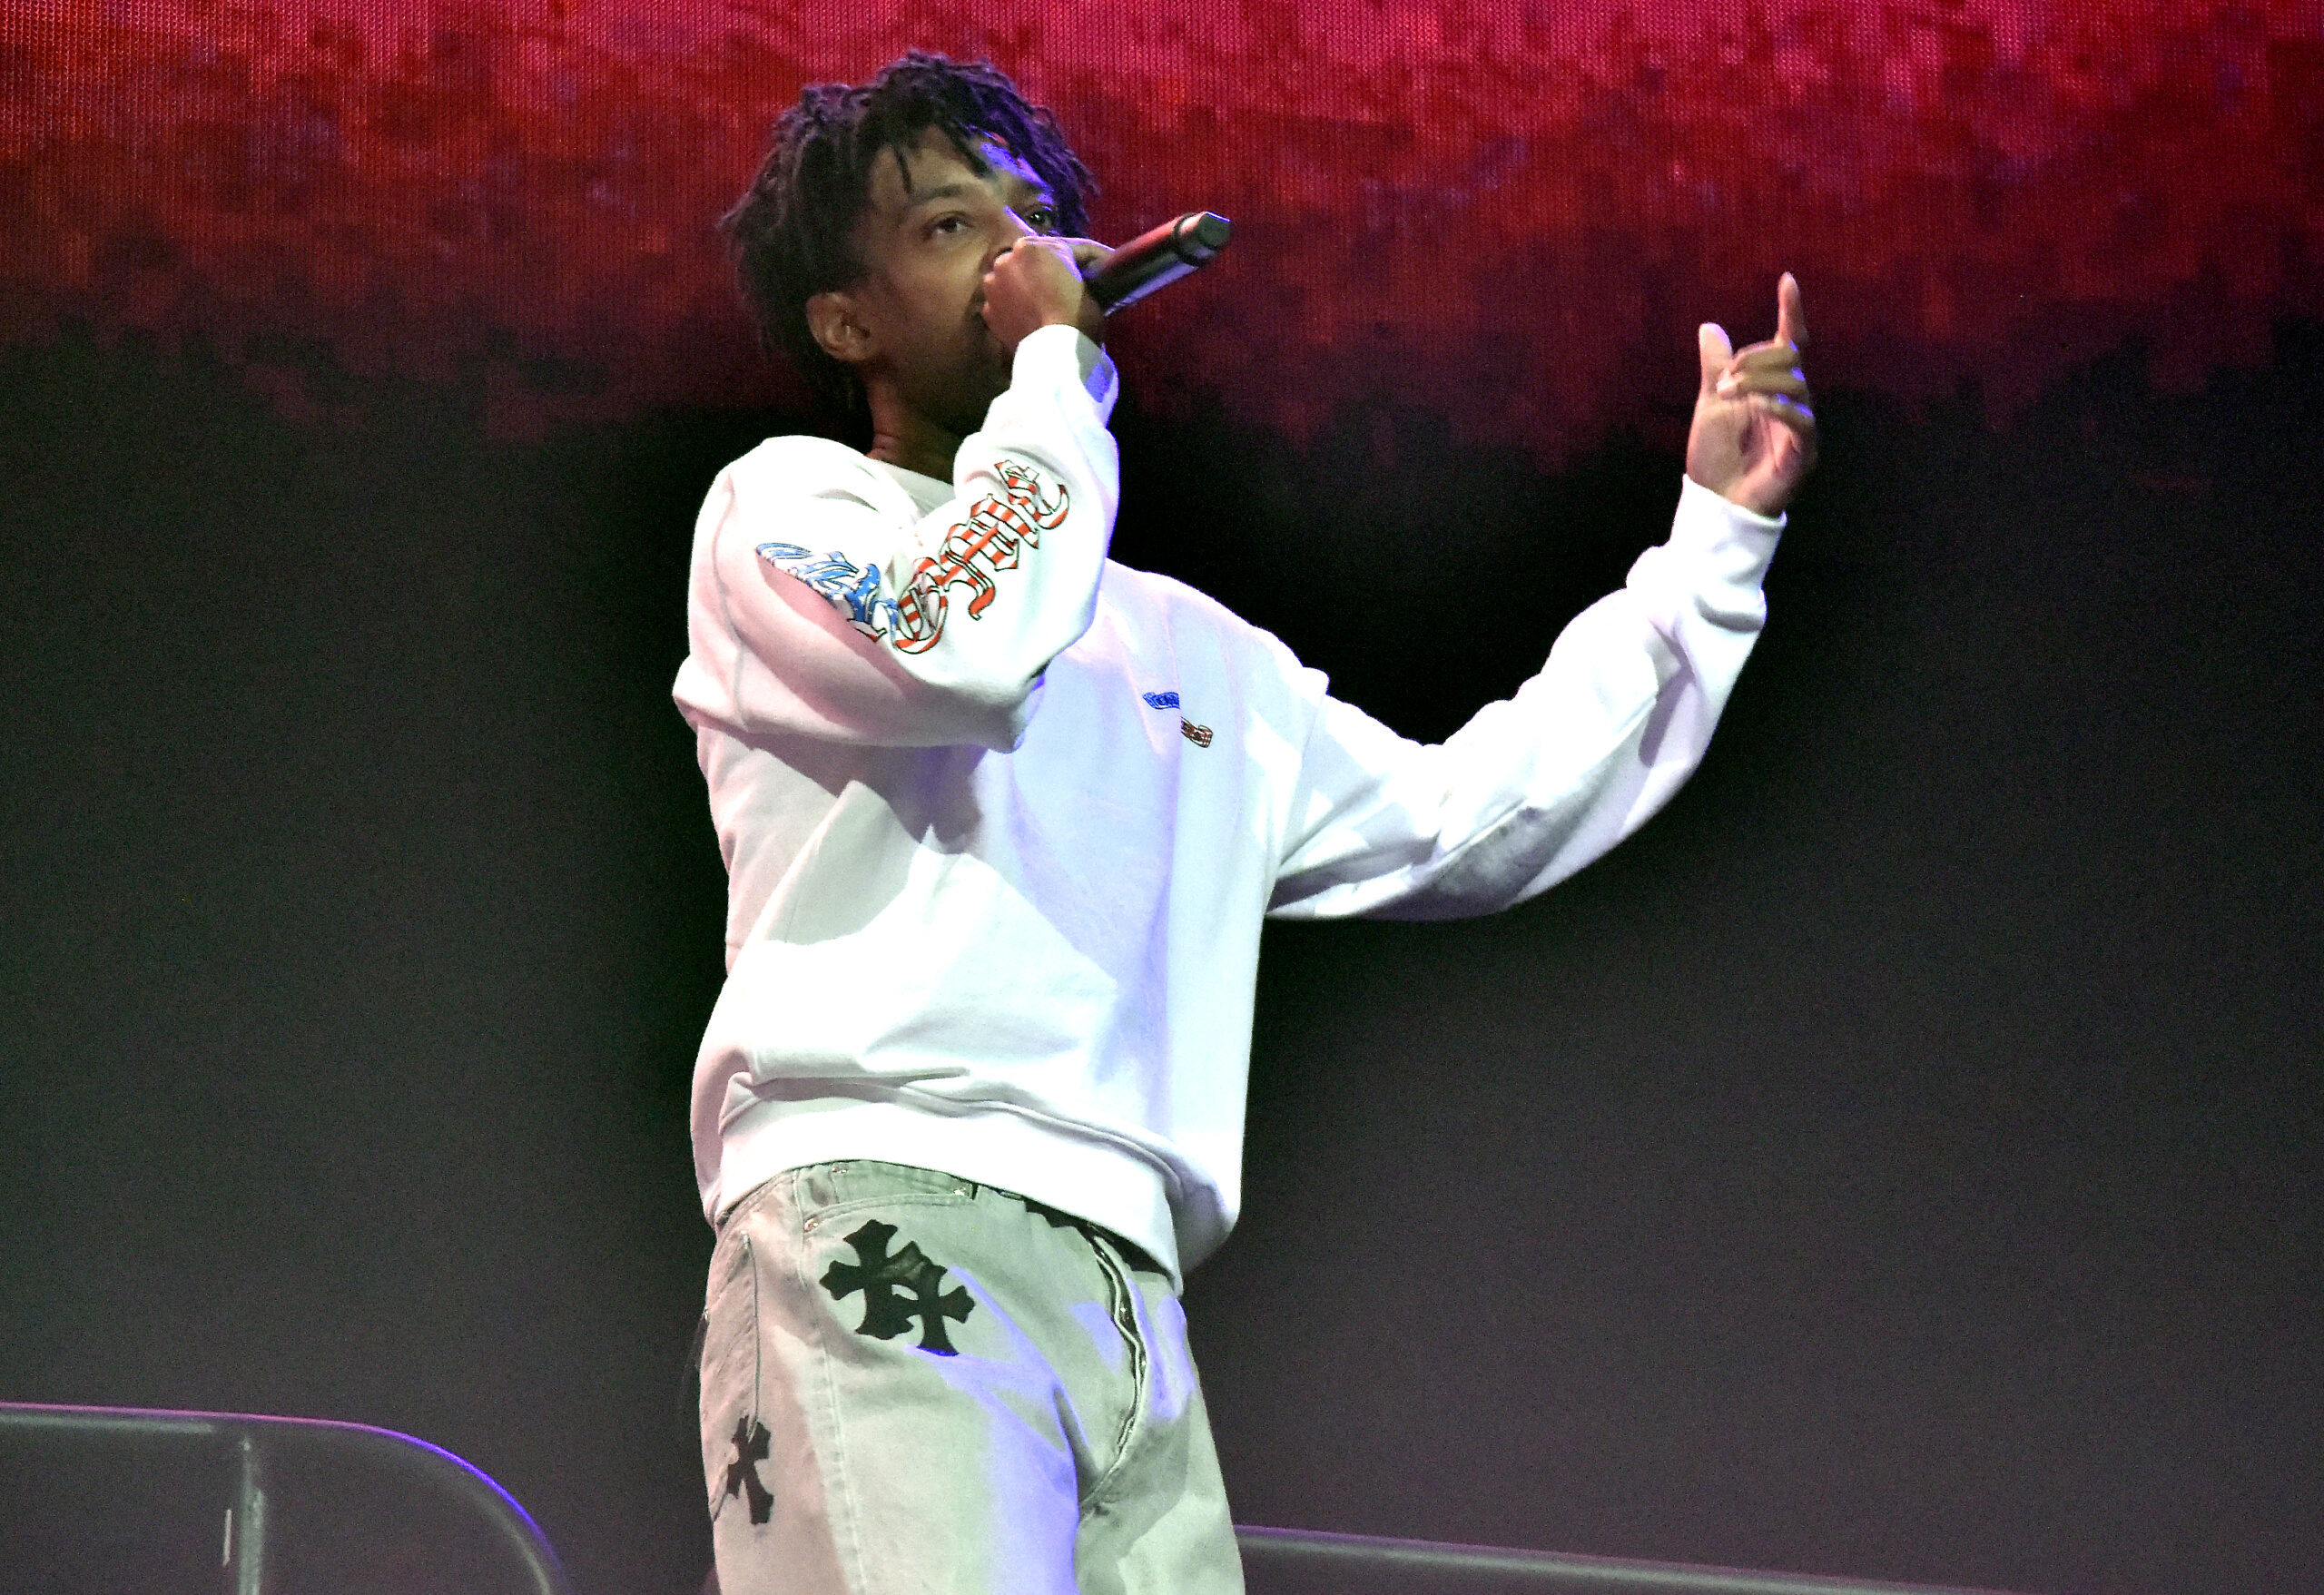 Freaknik Festival Says They Plan To Sue 21 Savage Over Use Of The Event As Birthday Party Theme